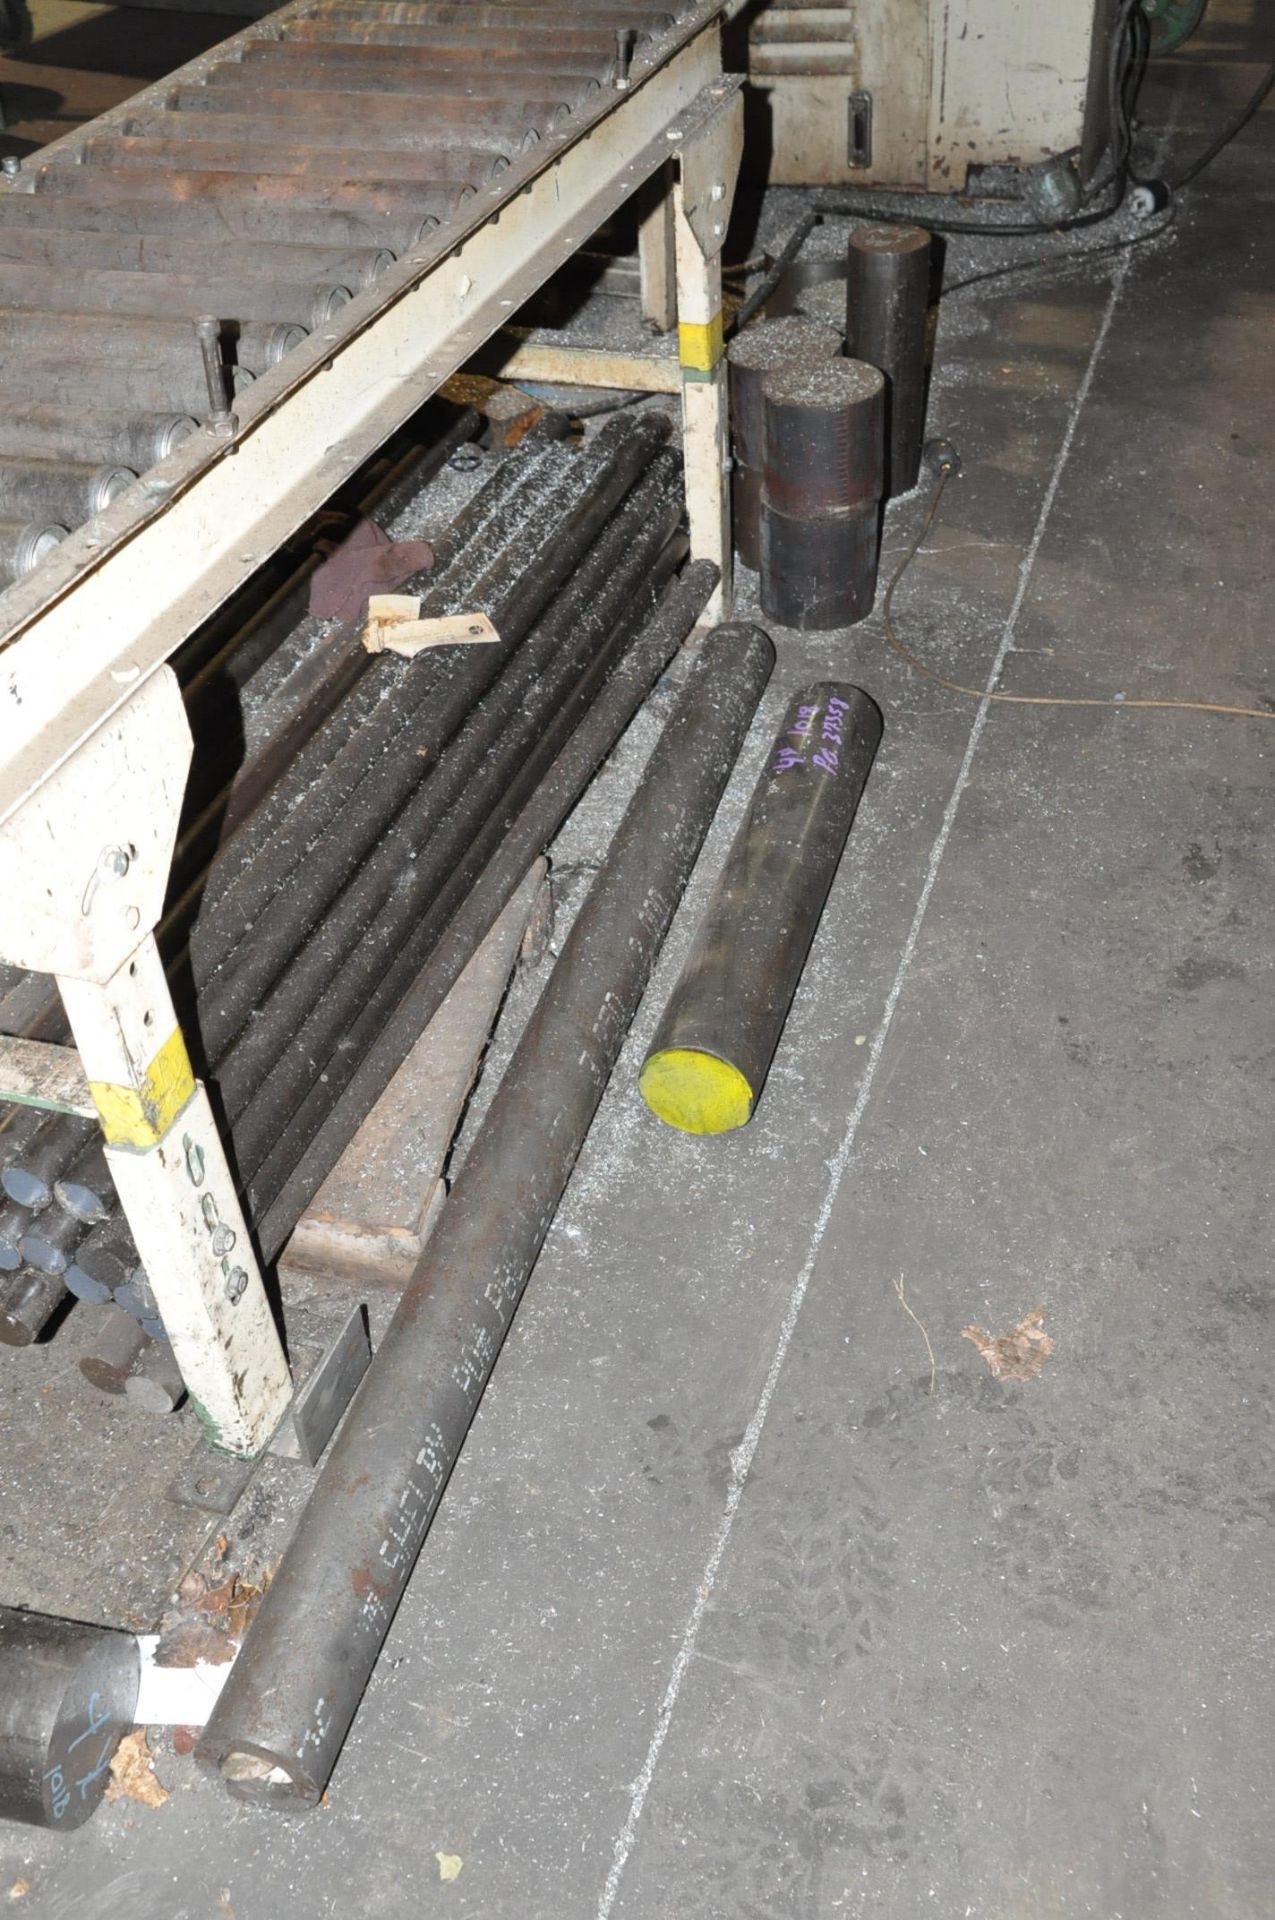 Lot-Solid Round Stock and Flat Bar Stock in (2) Groups on Floor - Image 5 of 5